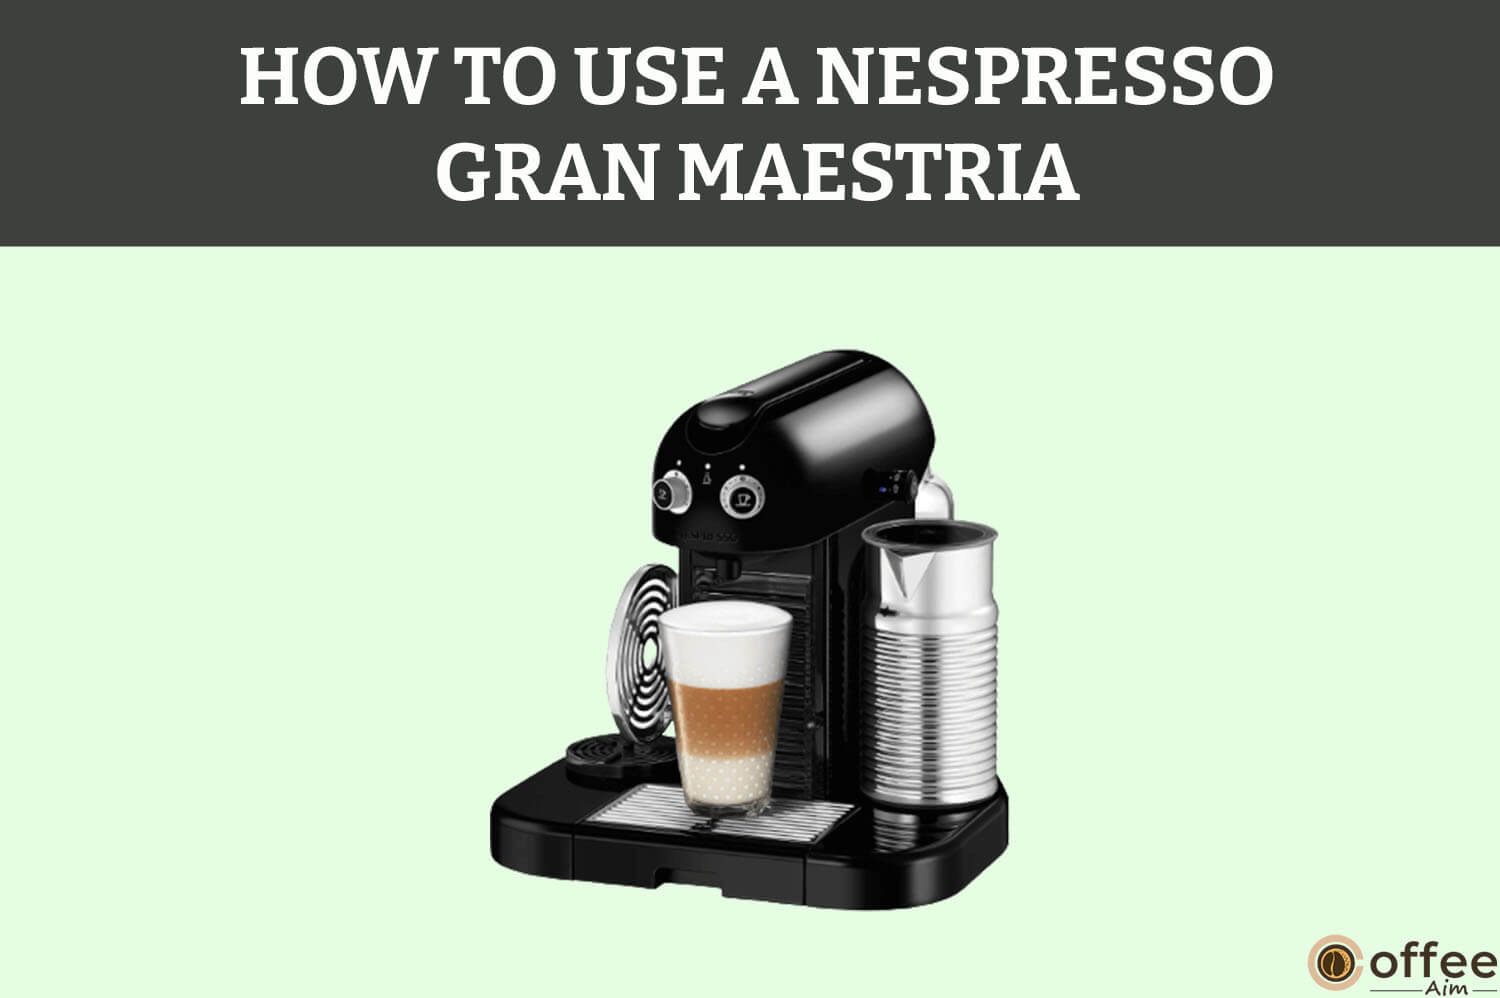 Featured image for the article "How to Use A Nespresso Gran Maestria"